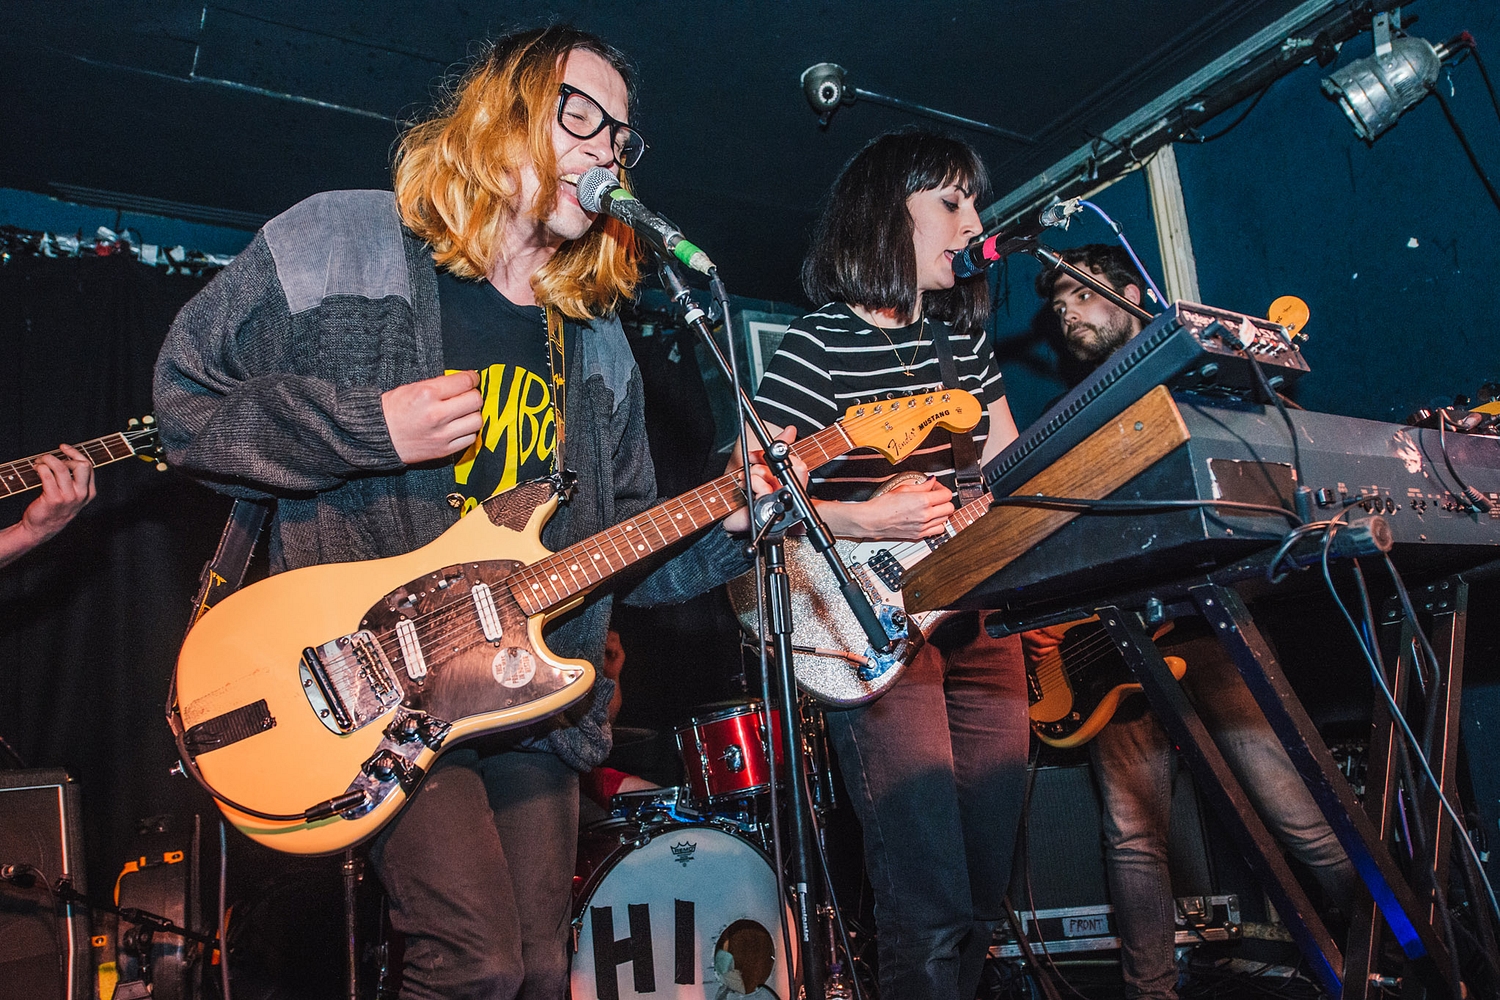 Menace Beach bring Record Store Day to spectacular, rowdy end at The Old Blue Last